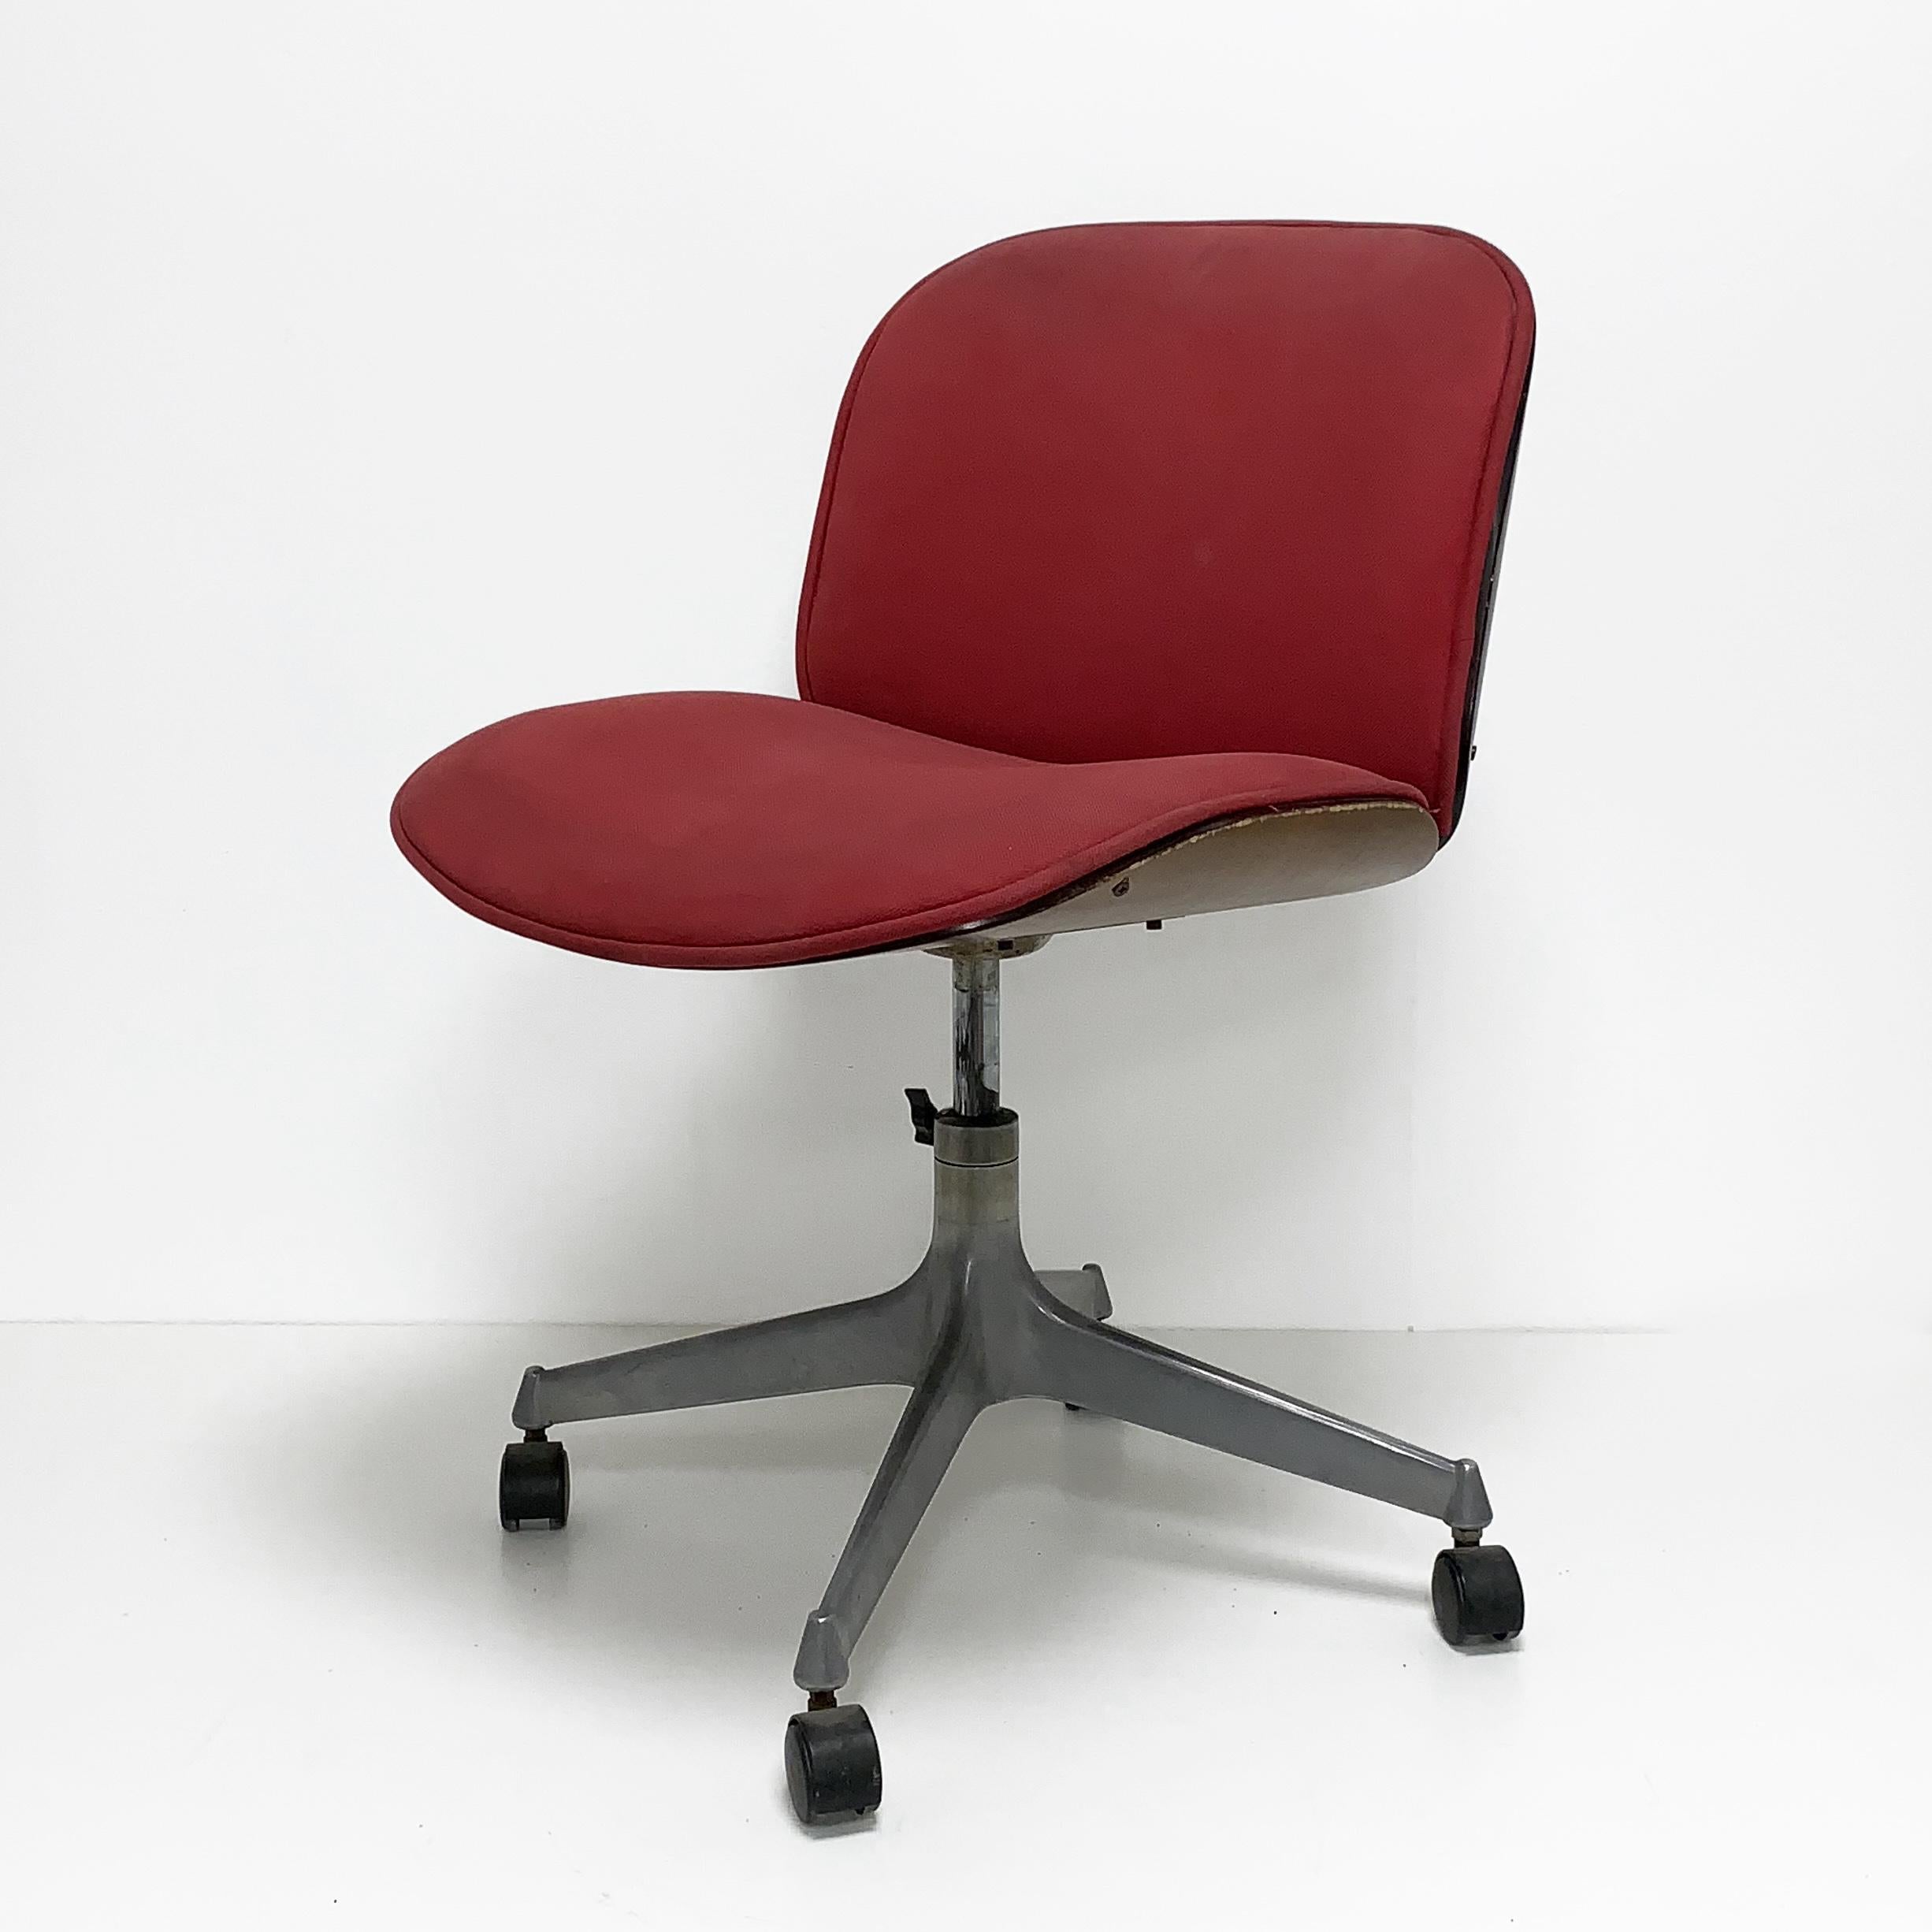 1950s office chair